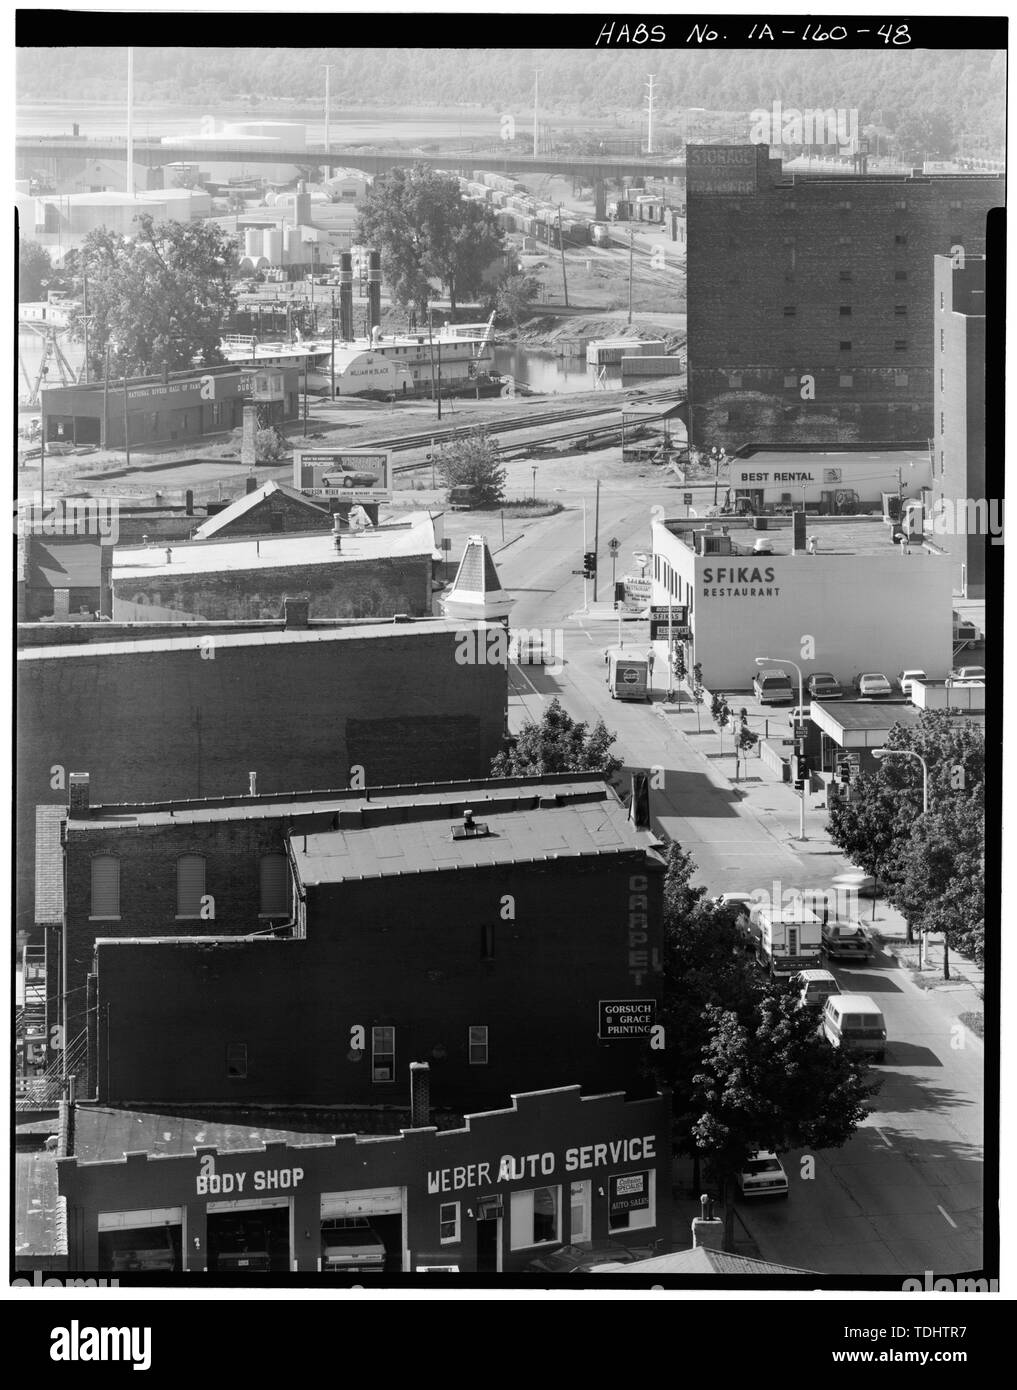 OVERALL VIEW OF COMMERCIAL-INDUSTRIAL DISTRICT, SHOWING BUILDINGS ON 400 BLOCK OF CENTRAL AVENUE. VIEW TO SOUTH. - Dubuque Commercial and Industrial Buildings, Dubuque, Dubuque County, IA; Dubuque Commercial and Industrial Buildings − HABS documentation project — in Dubuque, Iowa.  Image (1988): HABS—Historic American Buildings Survey of Iowa. Stock Photo